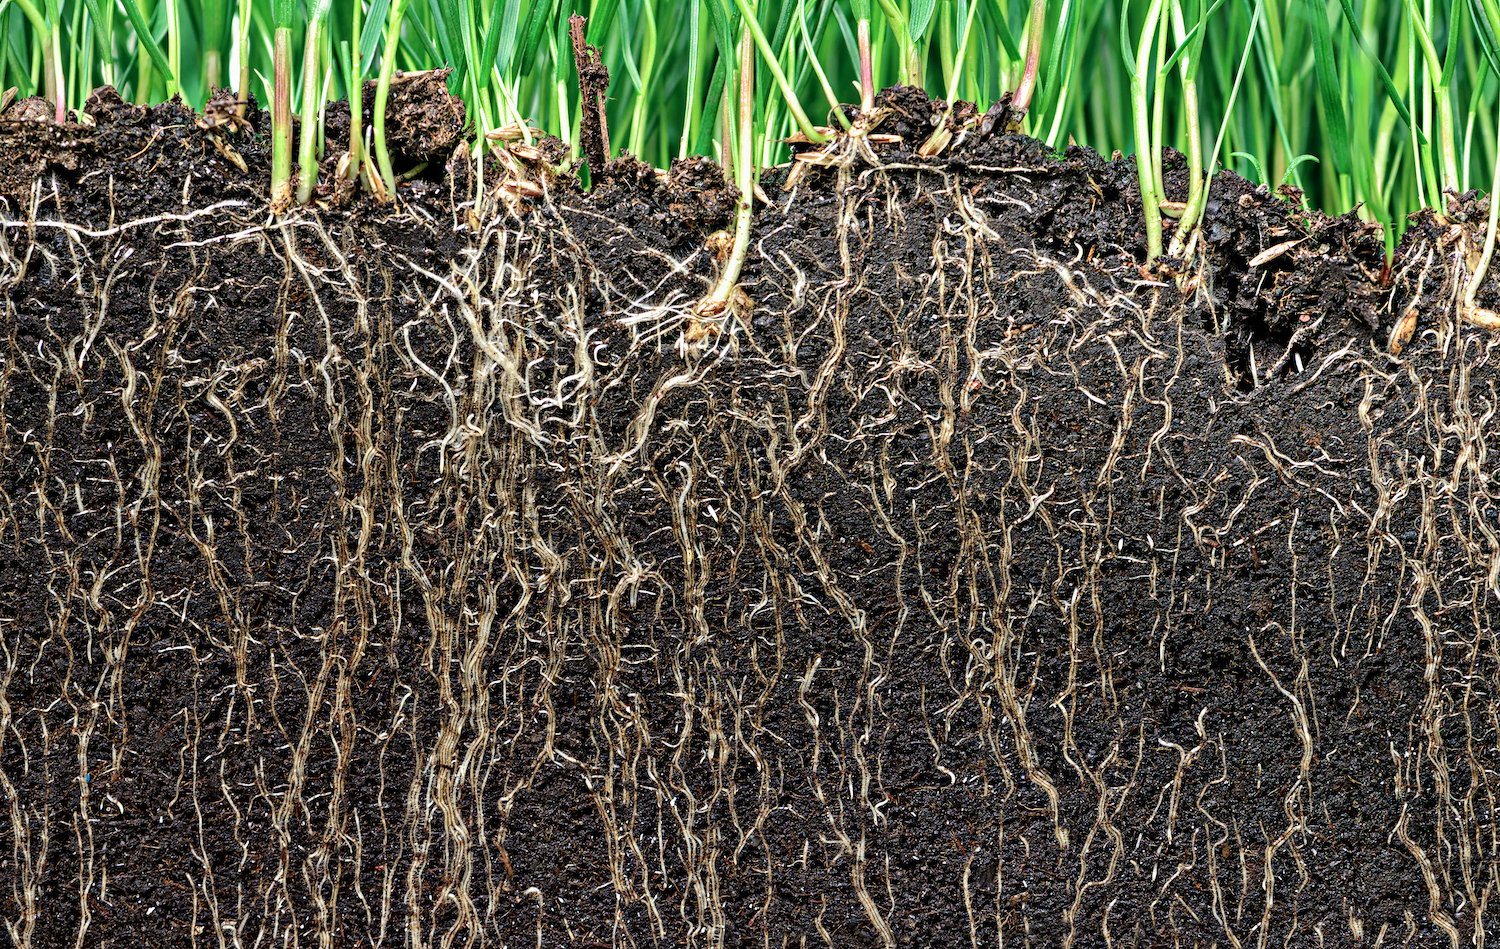 grass roots in soil